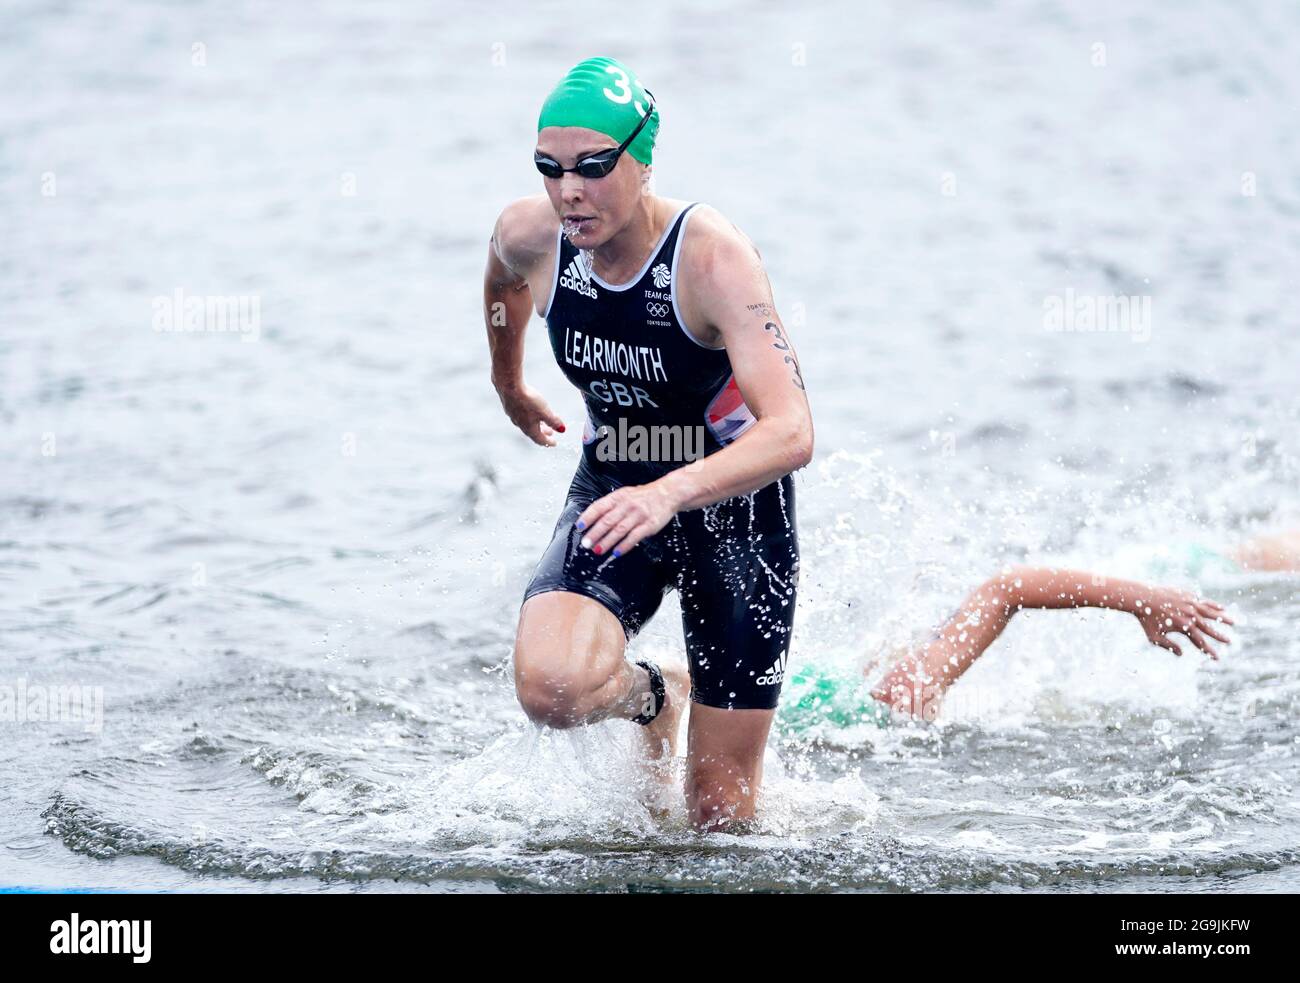 Great Britain's Jessica Learmonth exits the water during the Women's Triathlon at the Odaiba Marine Park on the fourth day of the Tokyo 2020 Olympic Games in Japan. Picture date: Tuesday July 27, 2021. Stock Photo